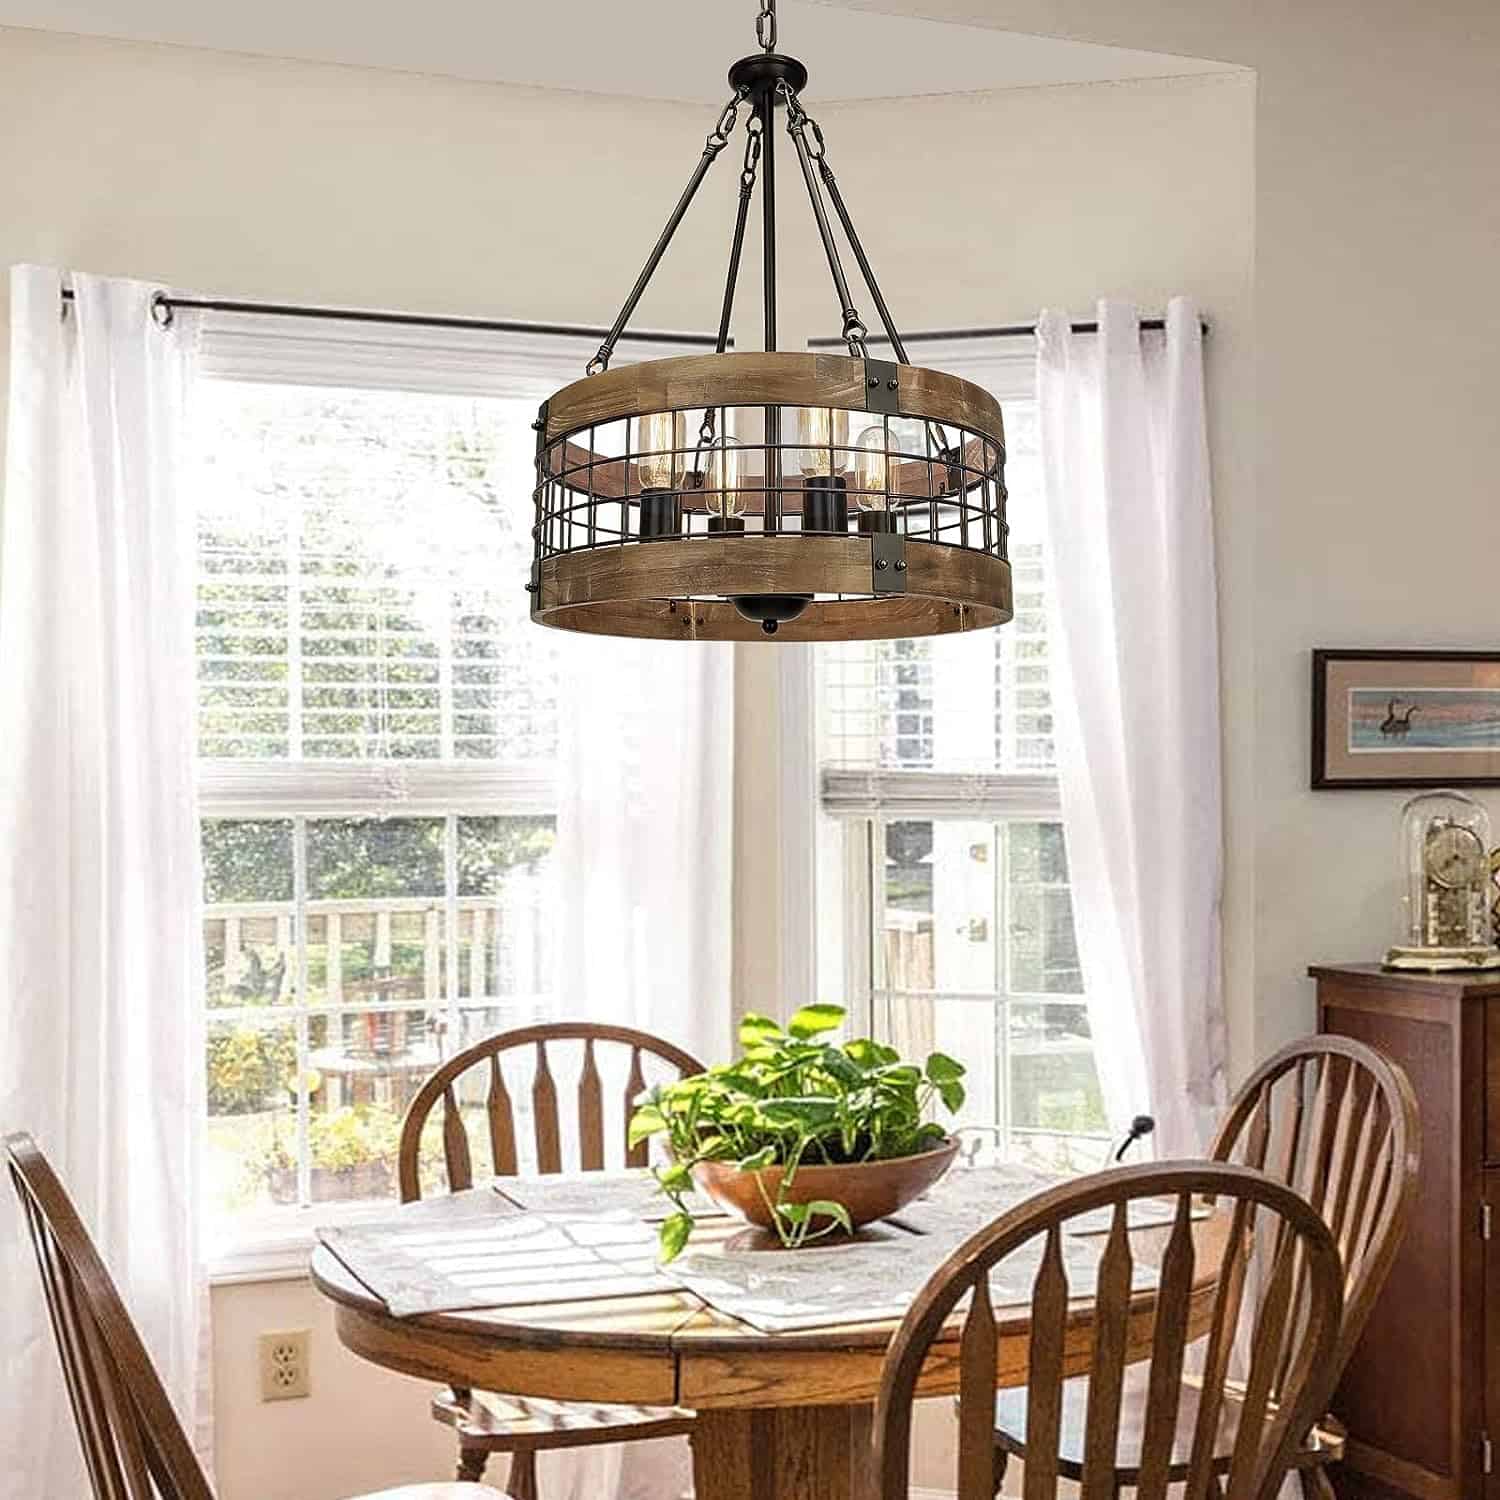 ACNKTZ Farmhouse Rustic Chandelier Light Fixture 4-Light Round Hanging Pendant Lighting for Dining Room Entryway Kitchen Island Foyer Breakfast Area Black Wood and Black Metal Finish 2